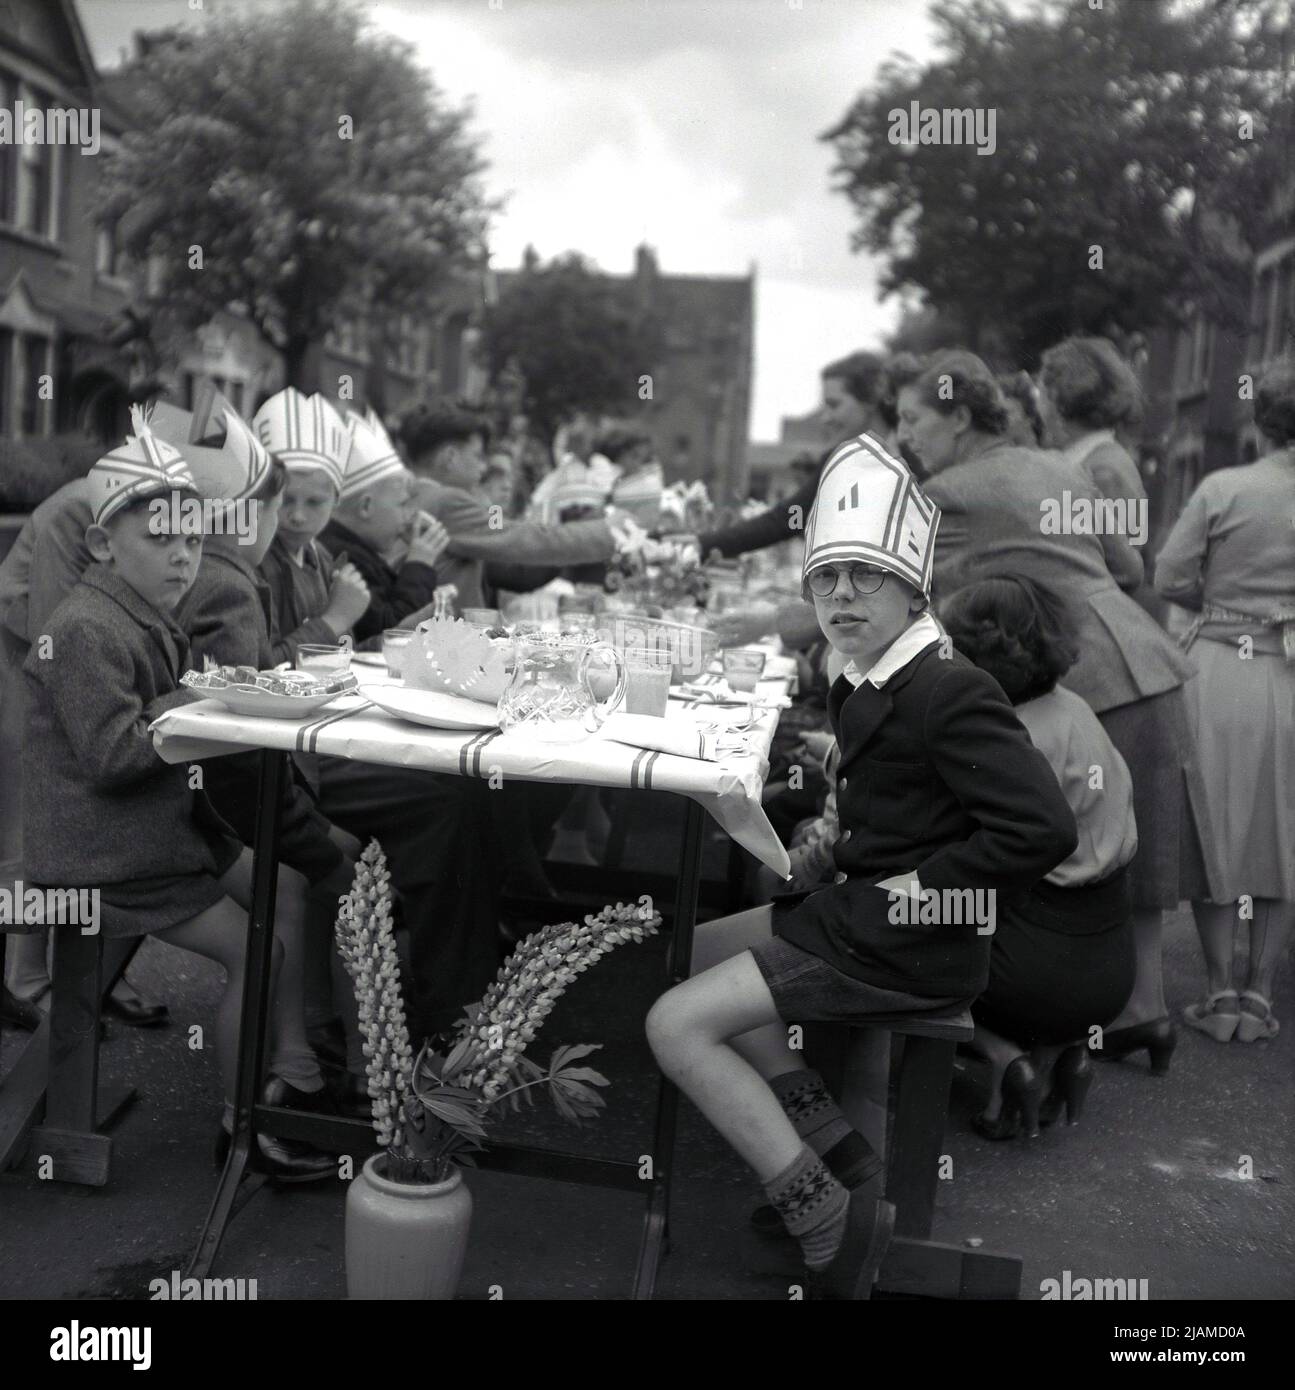 1953, historical, street party celebrating the Coronation of Queen Elizabeth II to the throne, a group of people sitting at table in a street, with young boys at the end of the table, sitting wearing hats, some with the letter E on, England, UK. Stock Photo